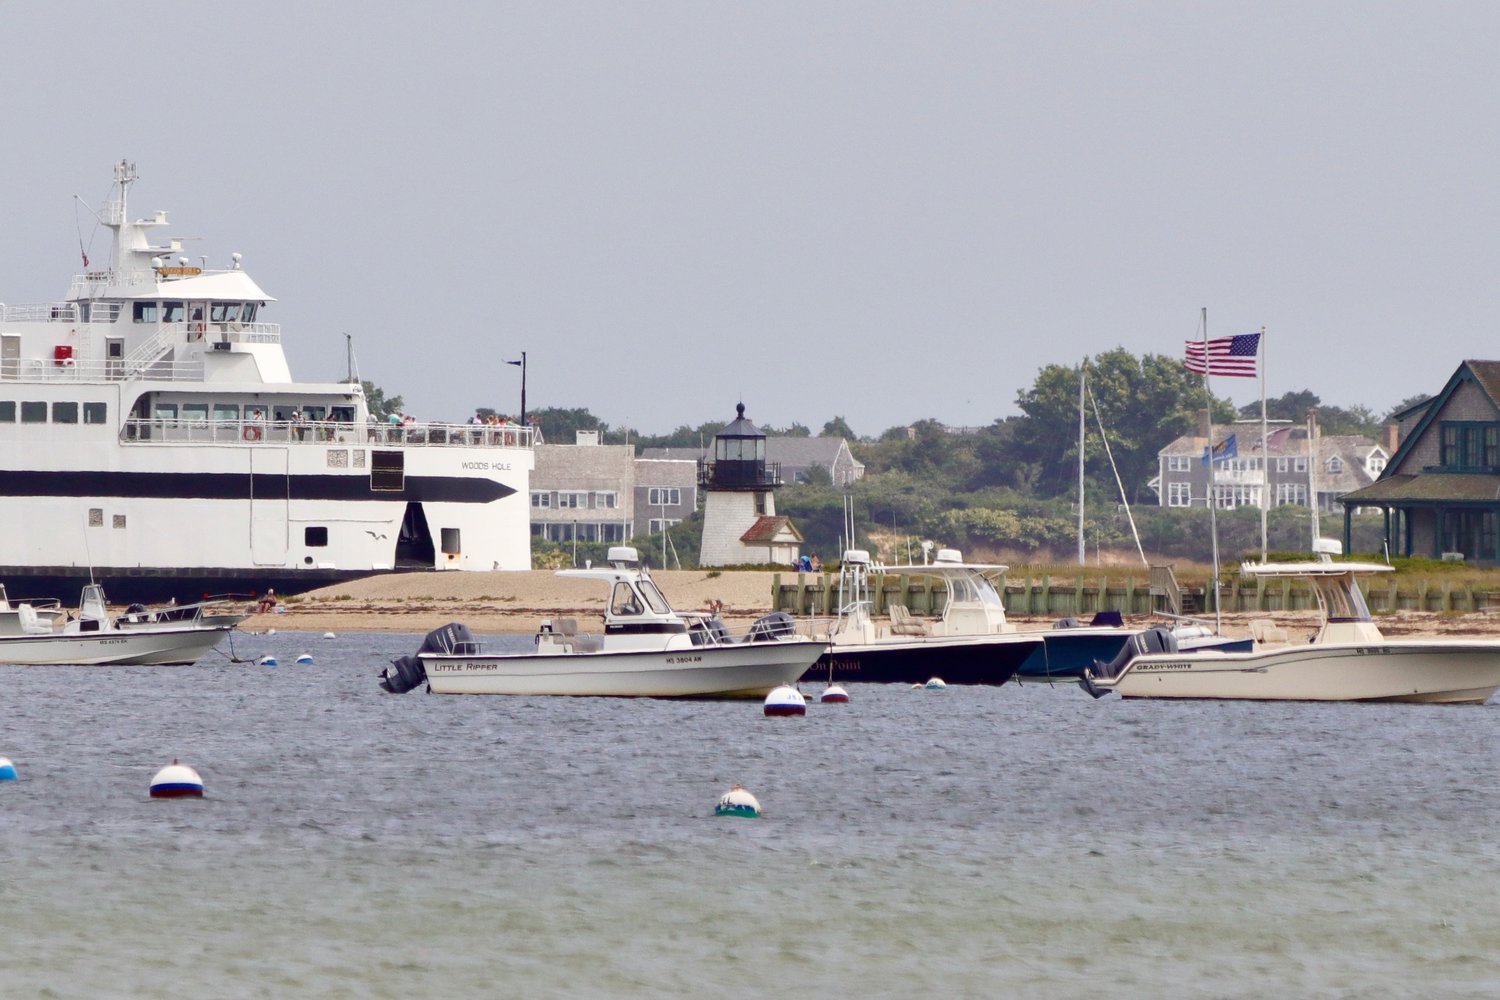 The Steamship Authority M/V Woods Hole rounds Brant Point Monday afternoon as seen from the channel side of Jetties Beach.